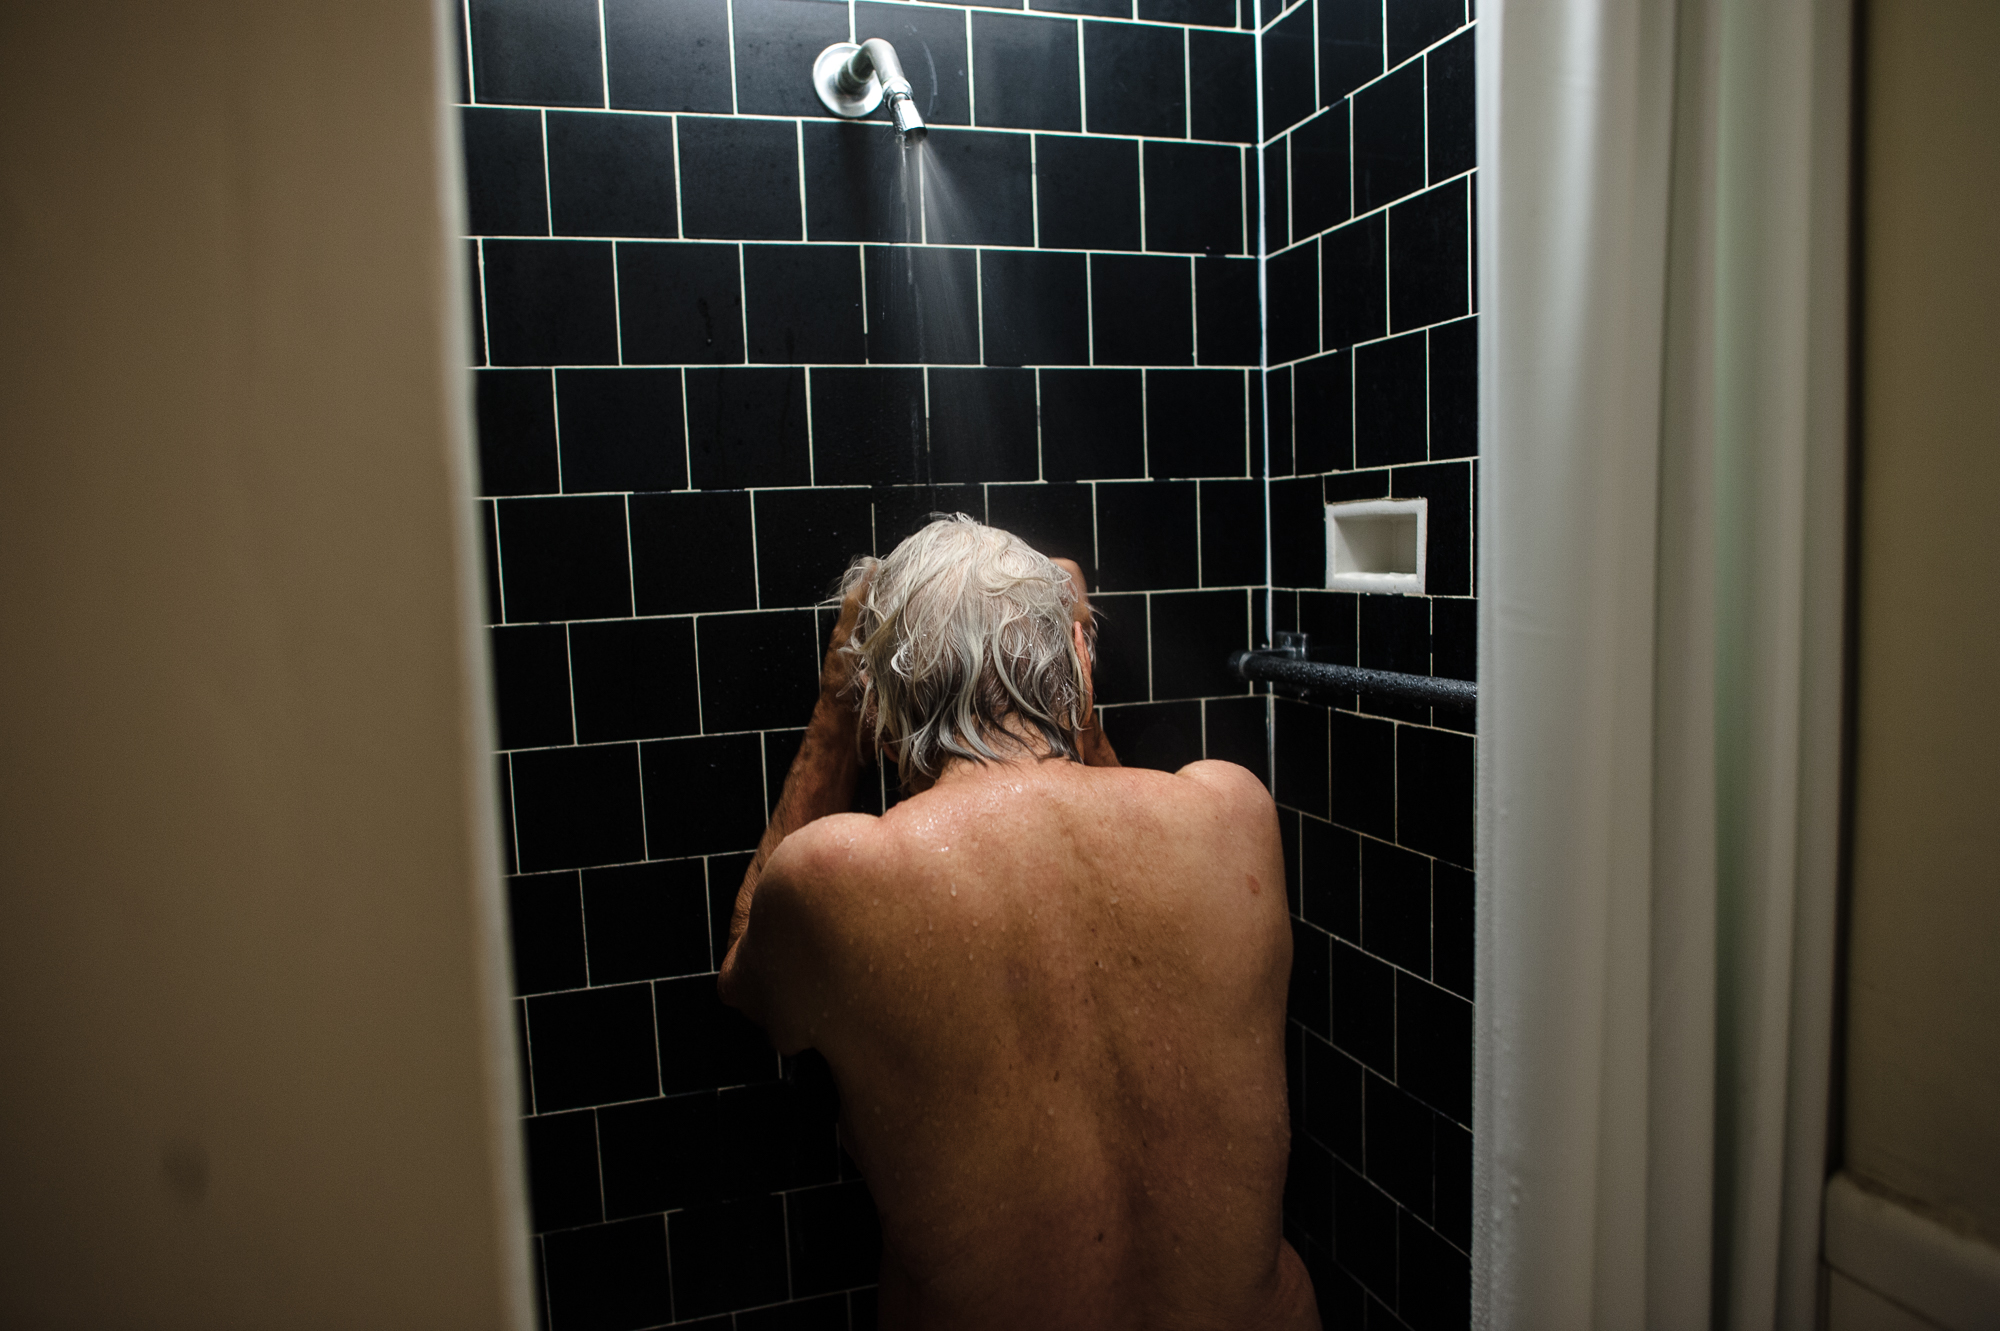  Bianca, age 85, showers, 2010. 